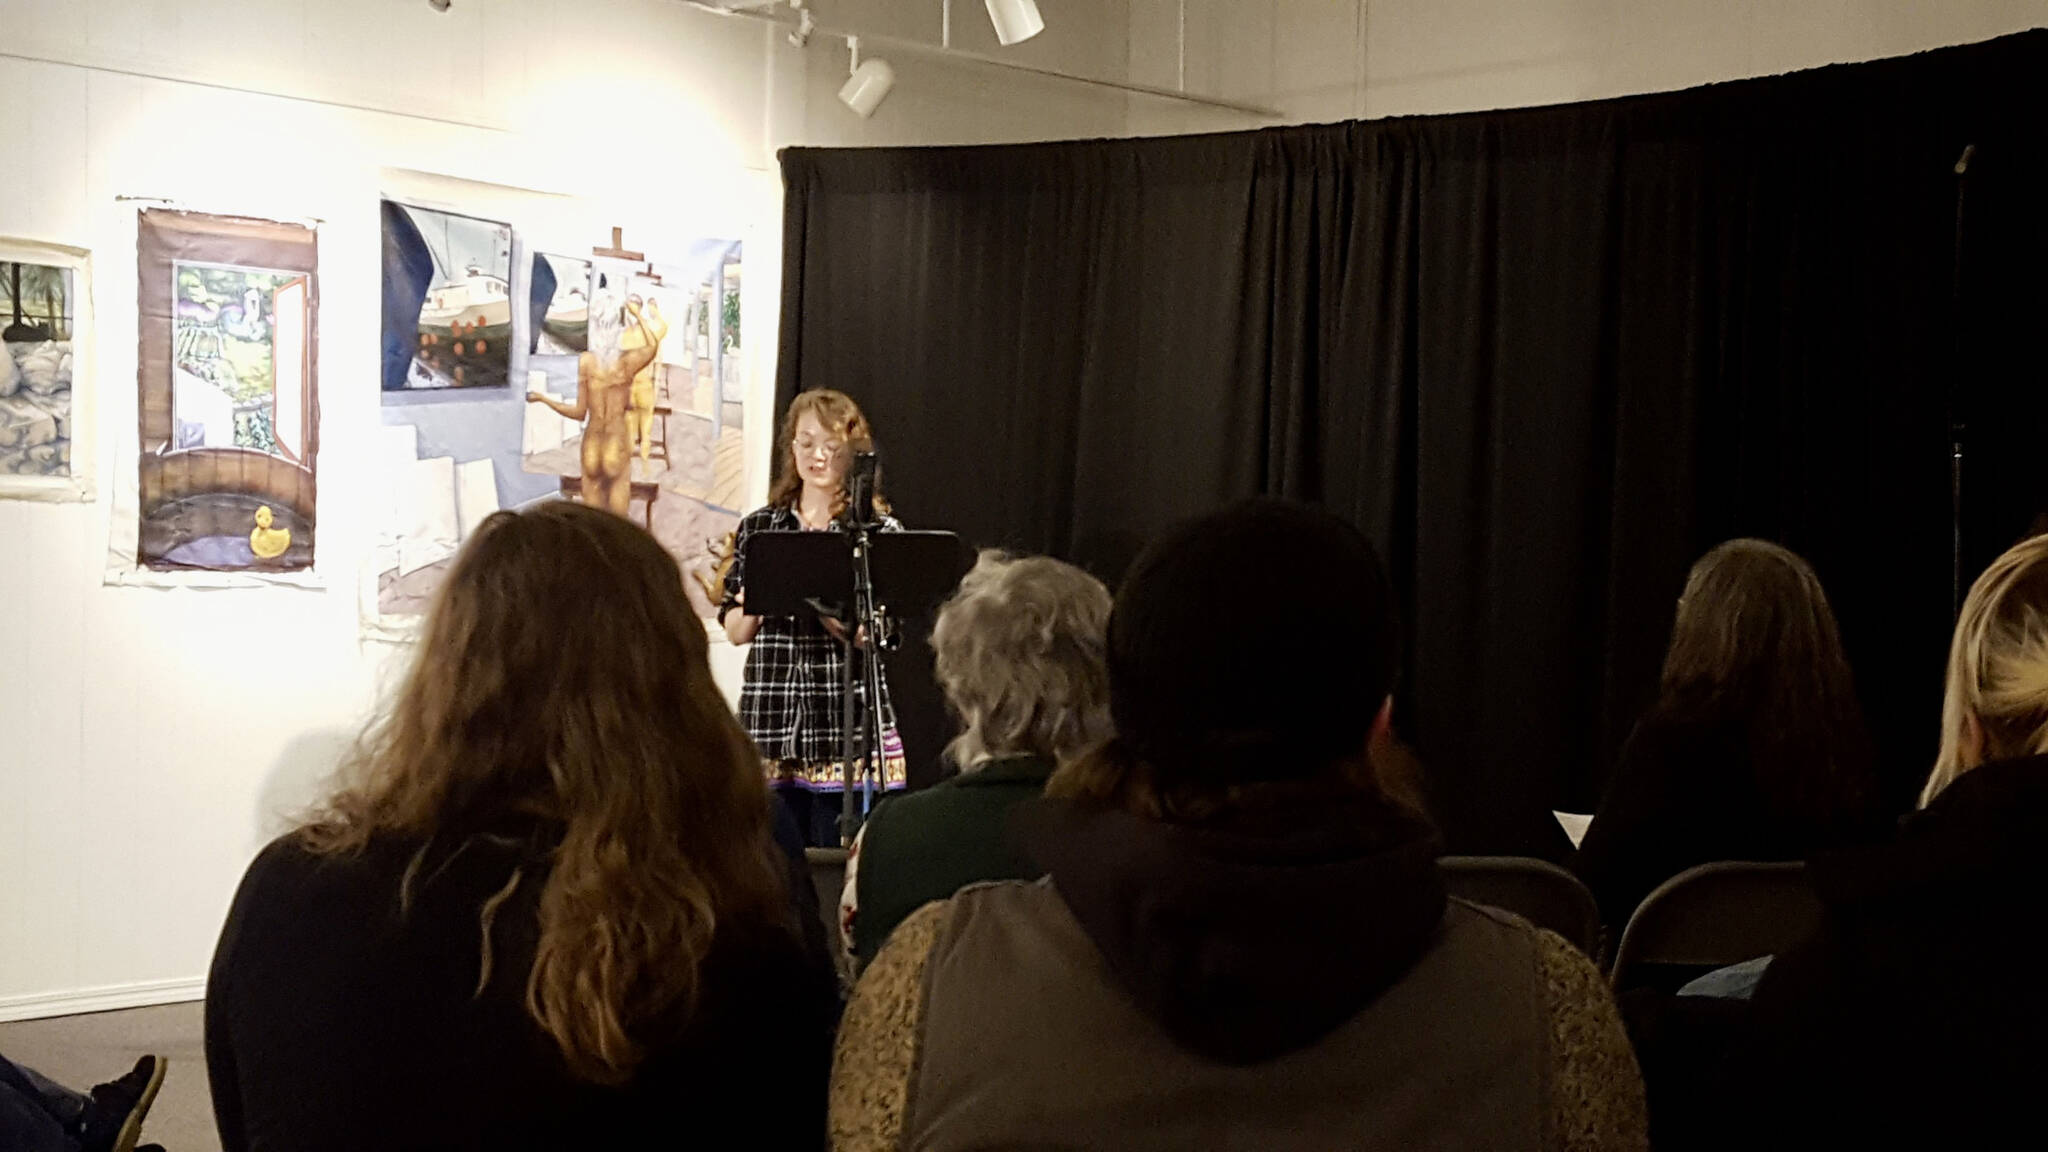 Elizabeth Chilson of Soldotna reads an excerpt of her first place fiction piece, “Signe and the Snow,” om October 2021 at Homer Council on the Arts as part of 24th Kenai Peninsula Writer’s Contest. (Photo provided)